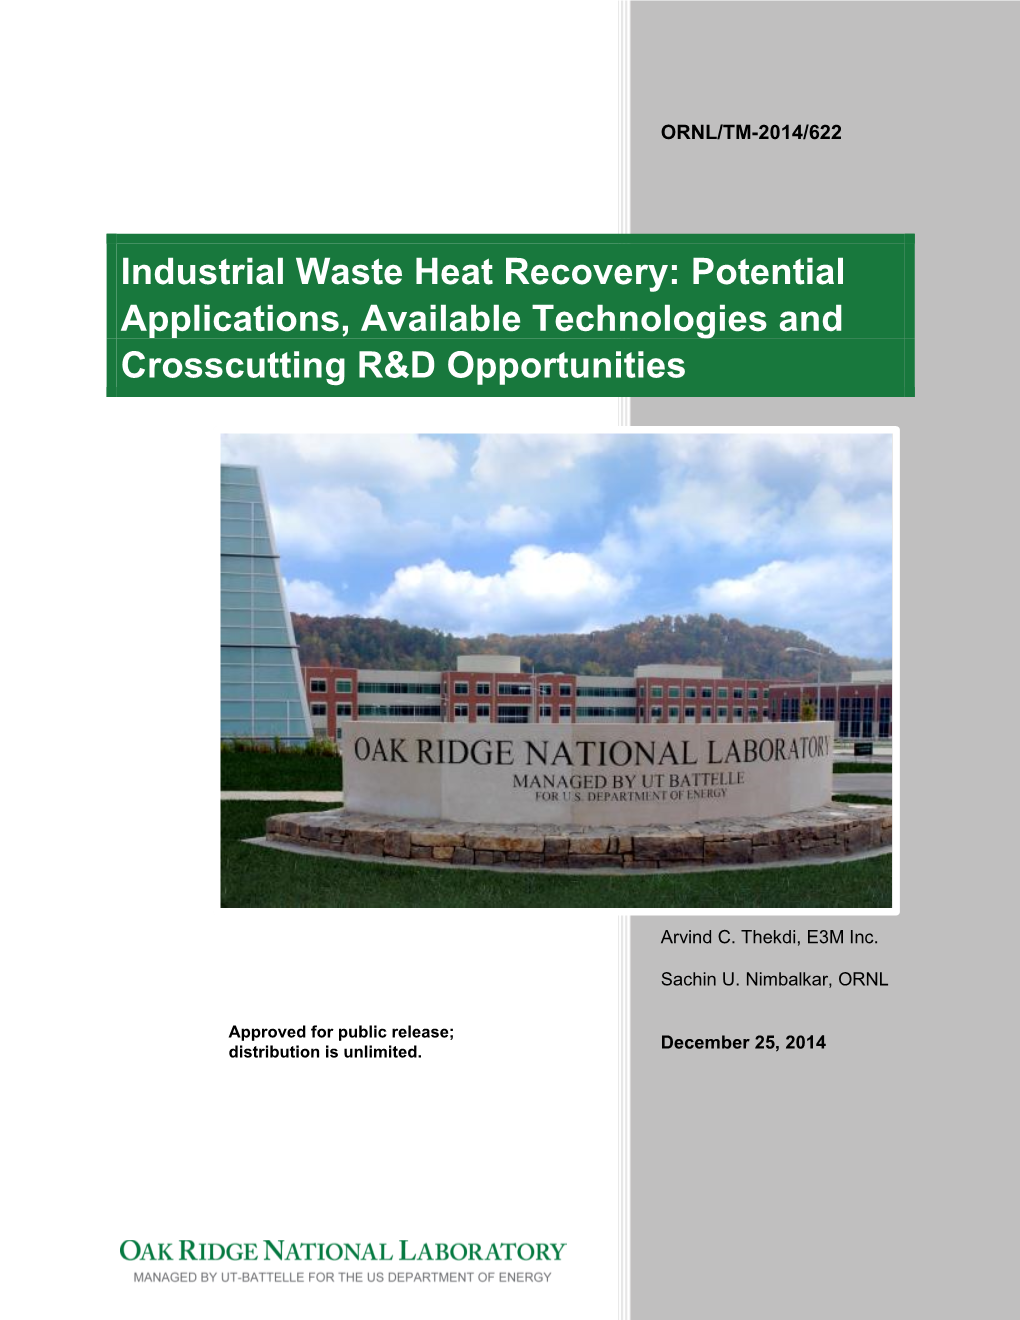 Industrial Waste Heat Recovery: Potential Applications, Available Technologies and Crosscutting R&D Opportunities